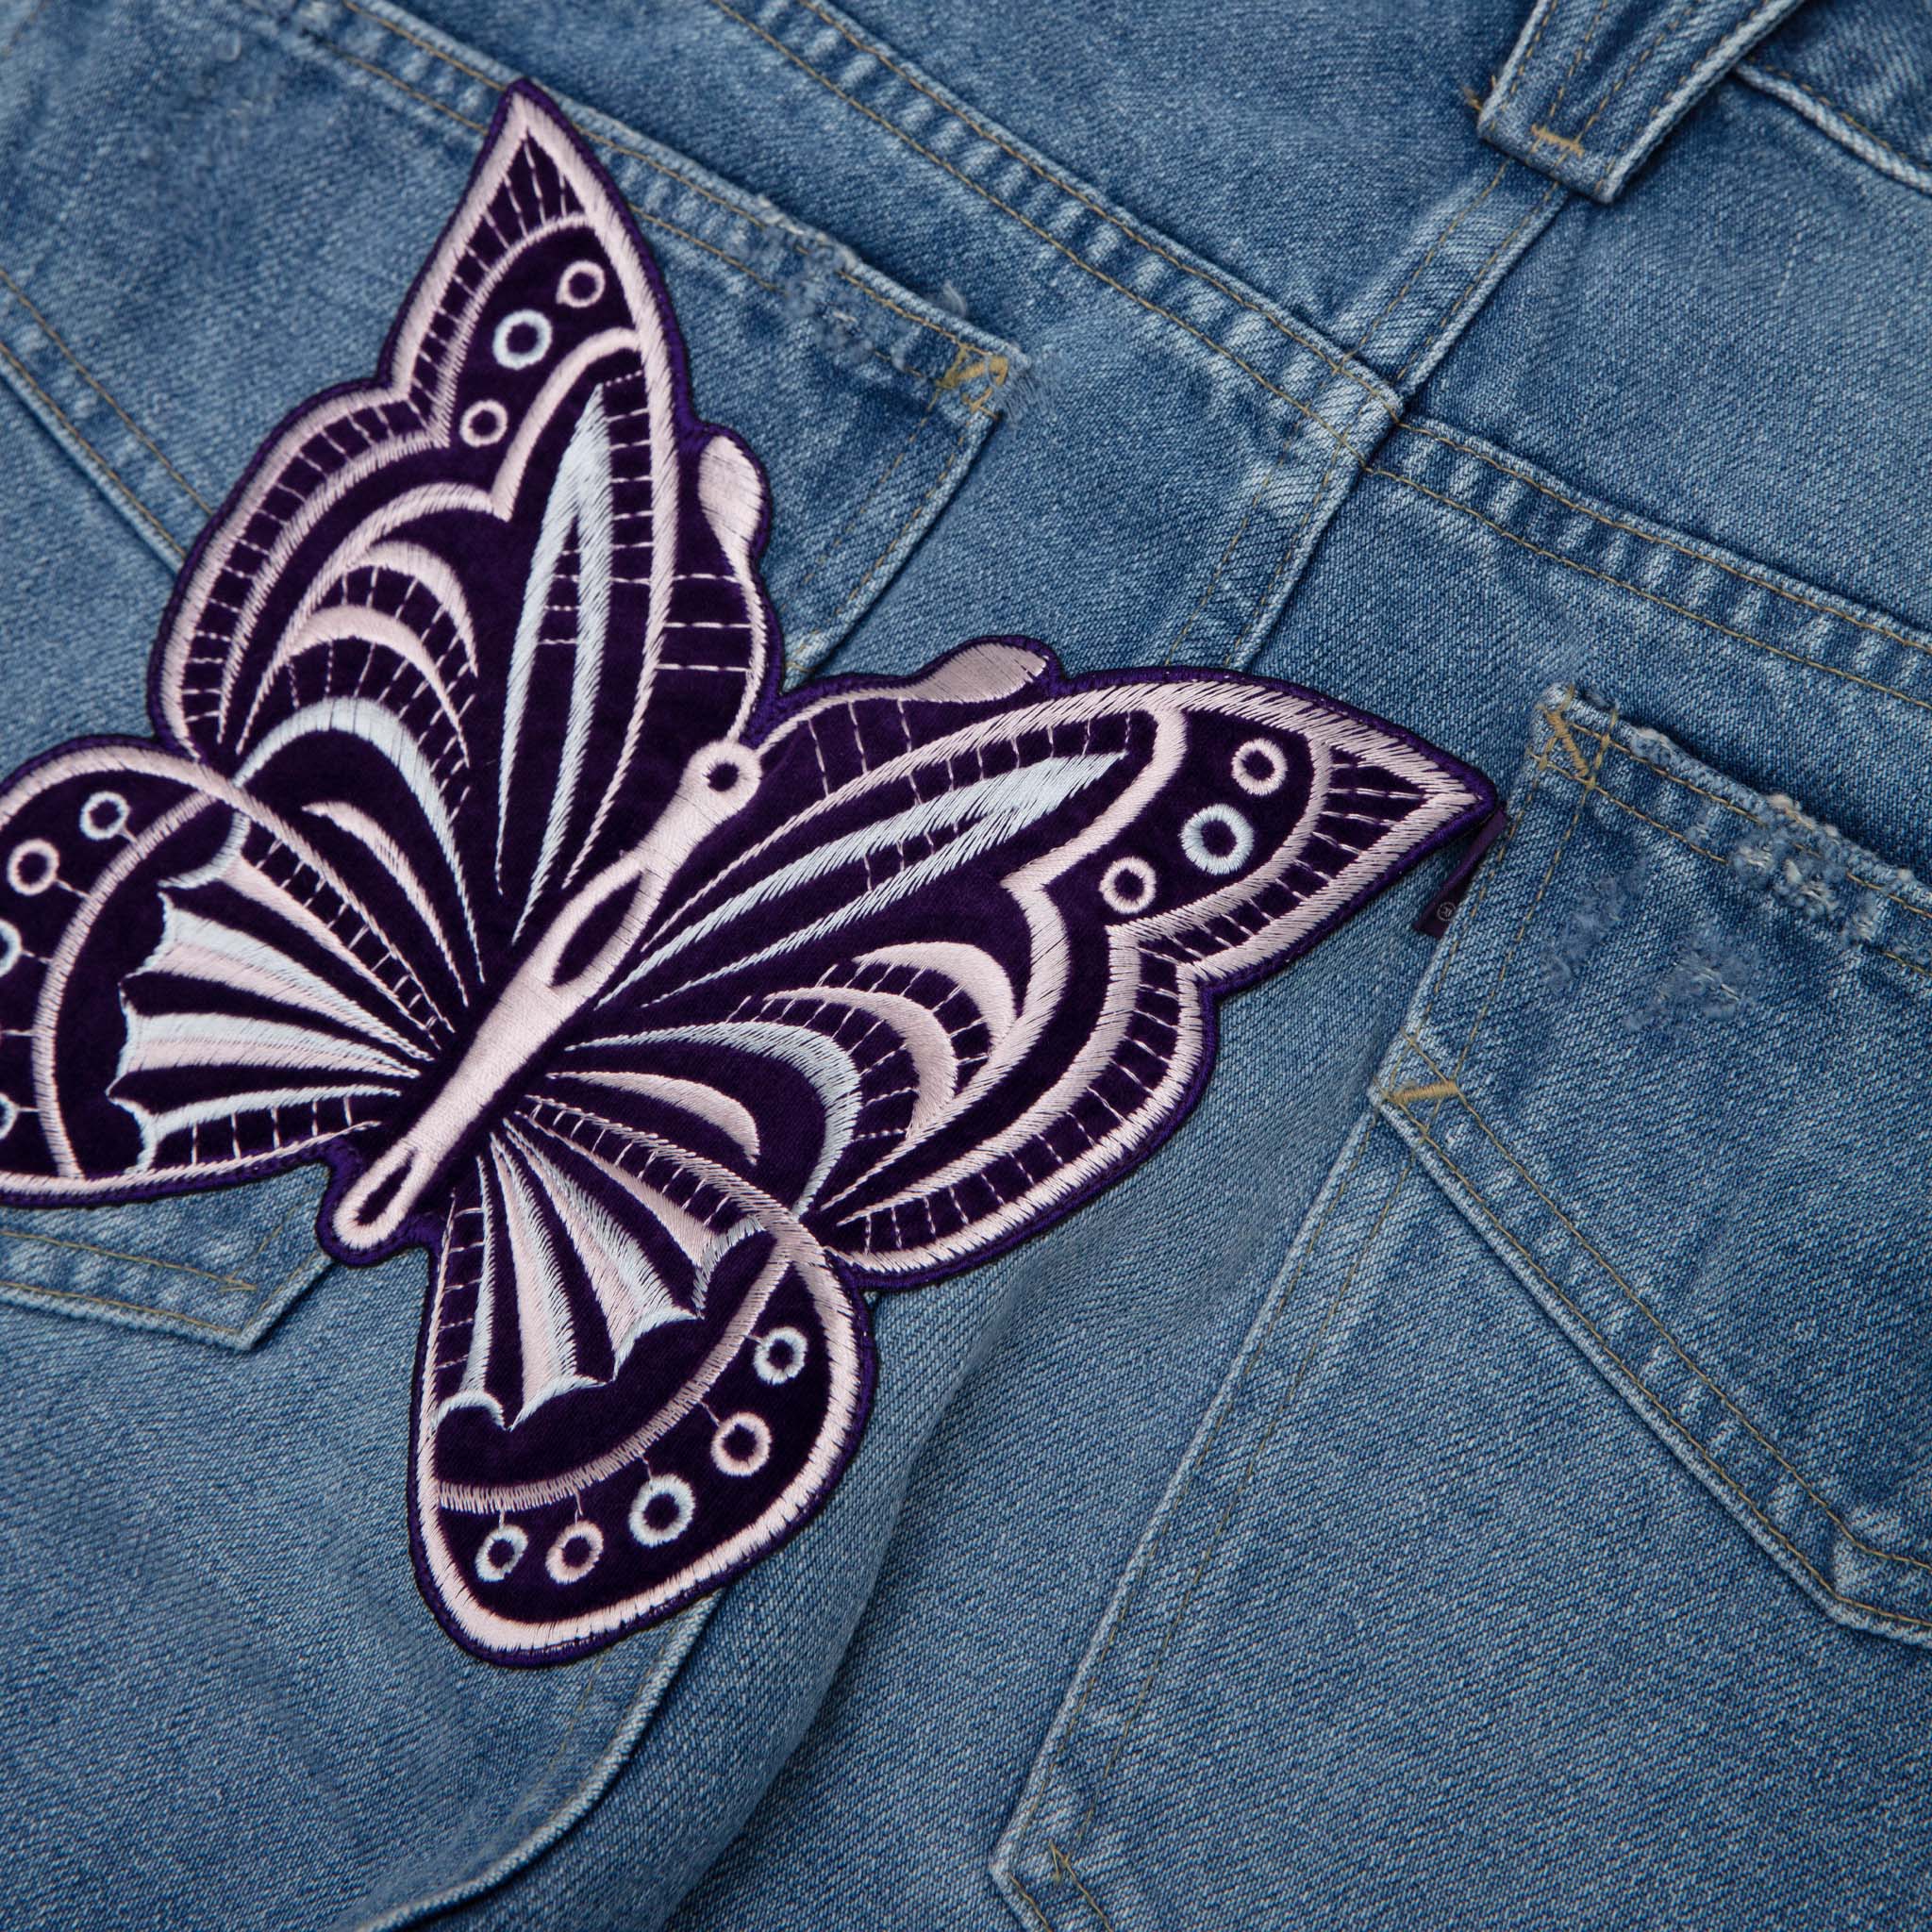 PAPILLON PATCHES STRAIGHT JEAN